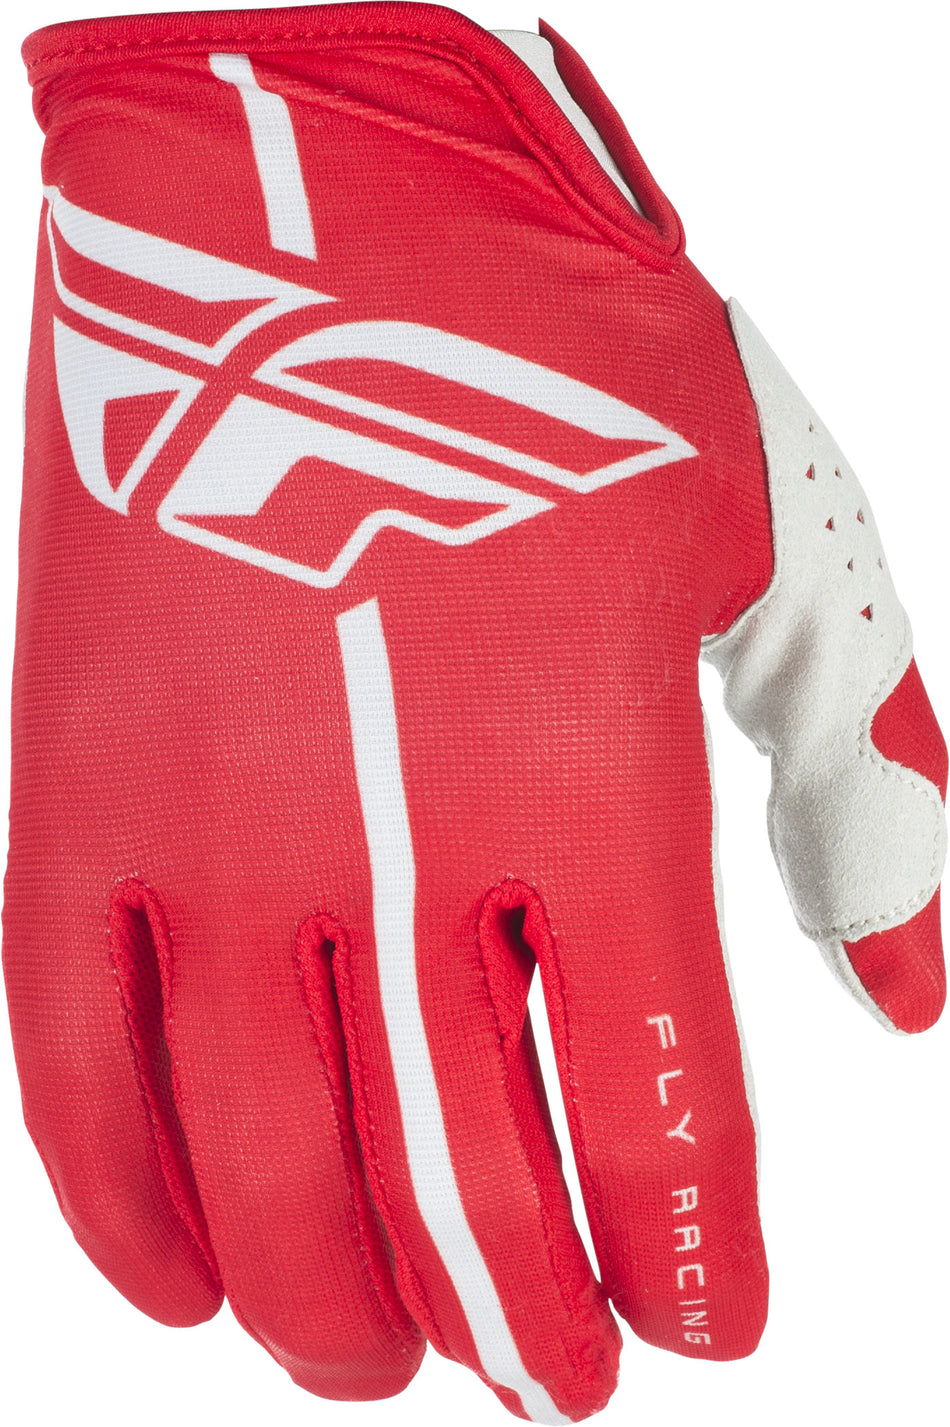 FLY RACING Lite Gloves Red/Grey Sz 9 371-01209